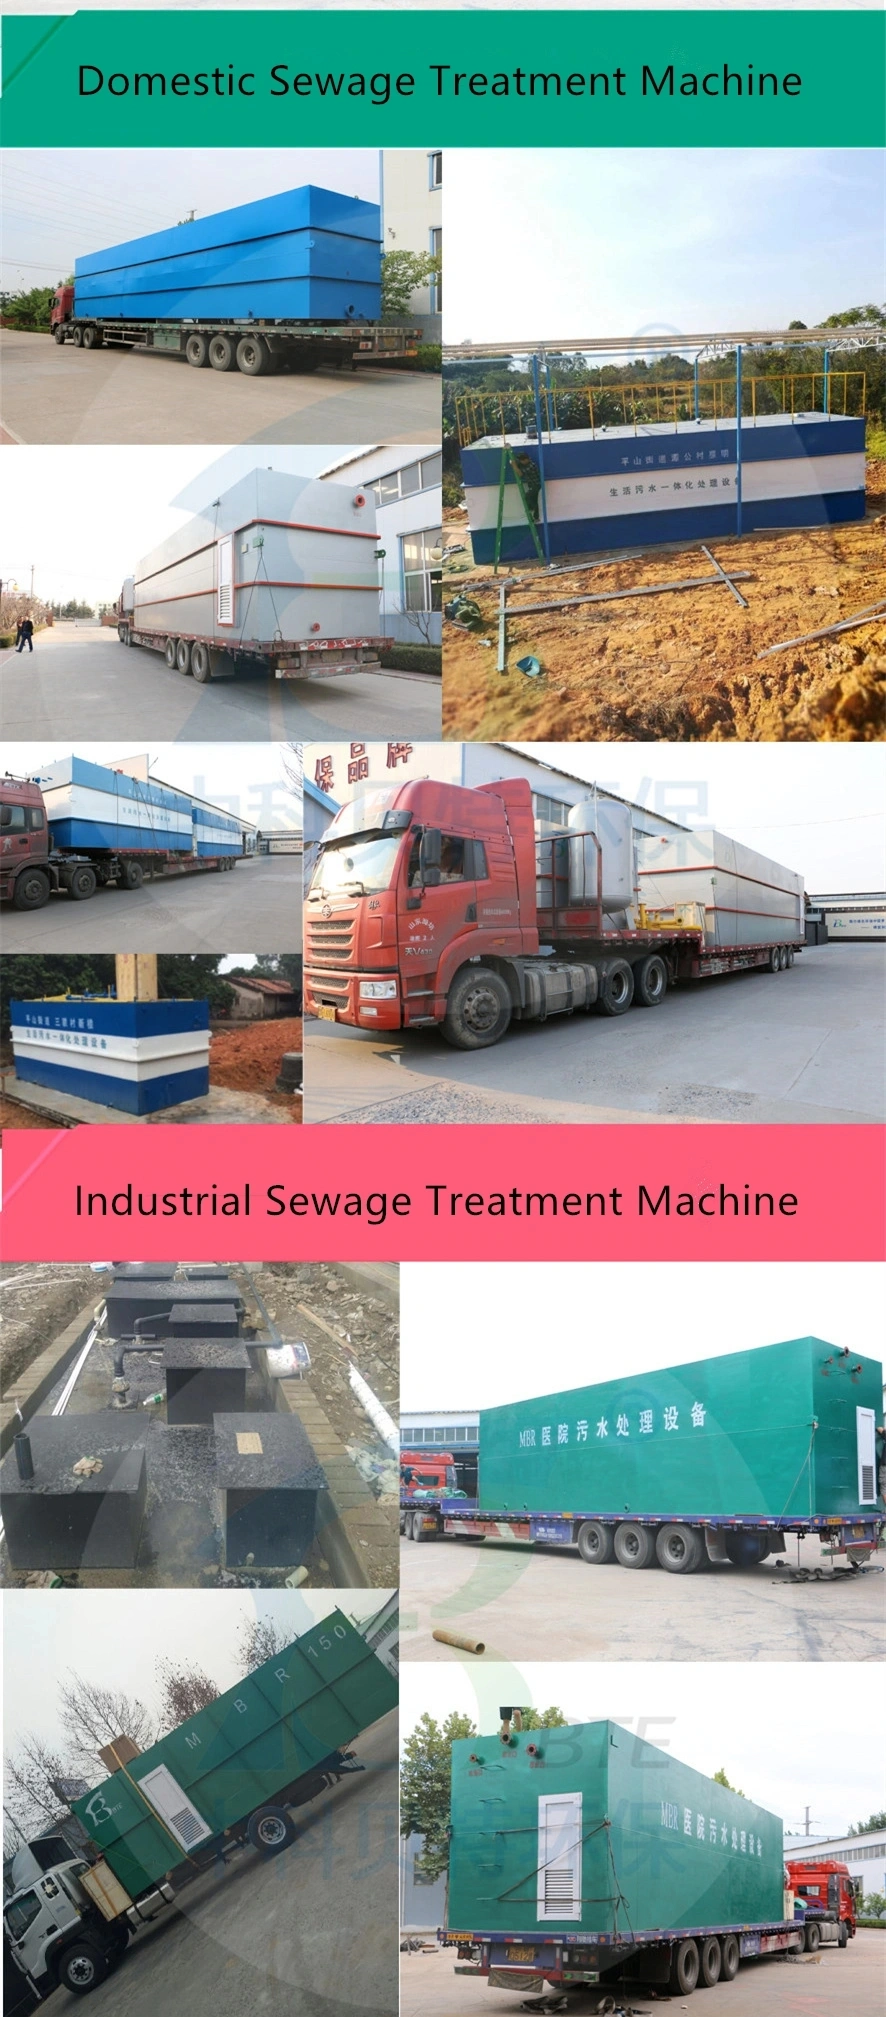 Mbr Sewage Treatment Equipment, Industrial Wastewater Treatment